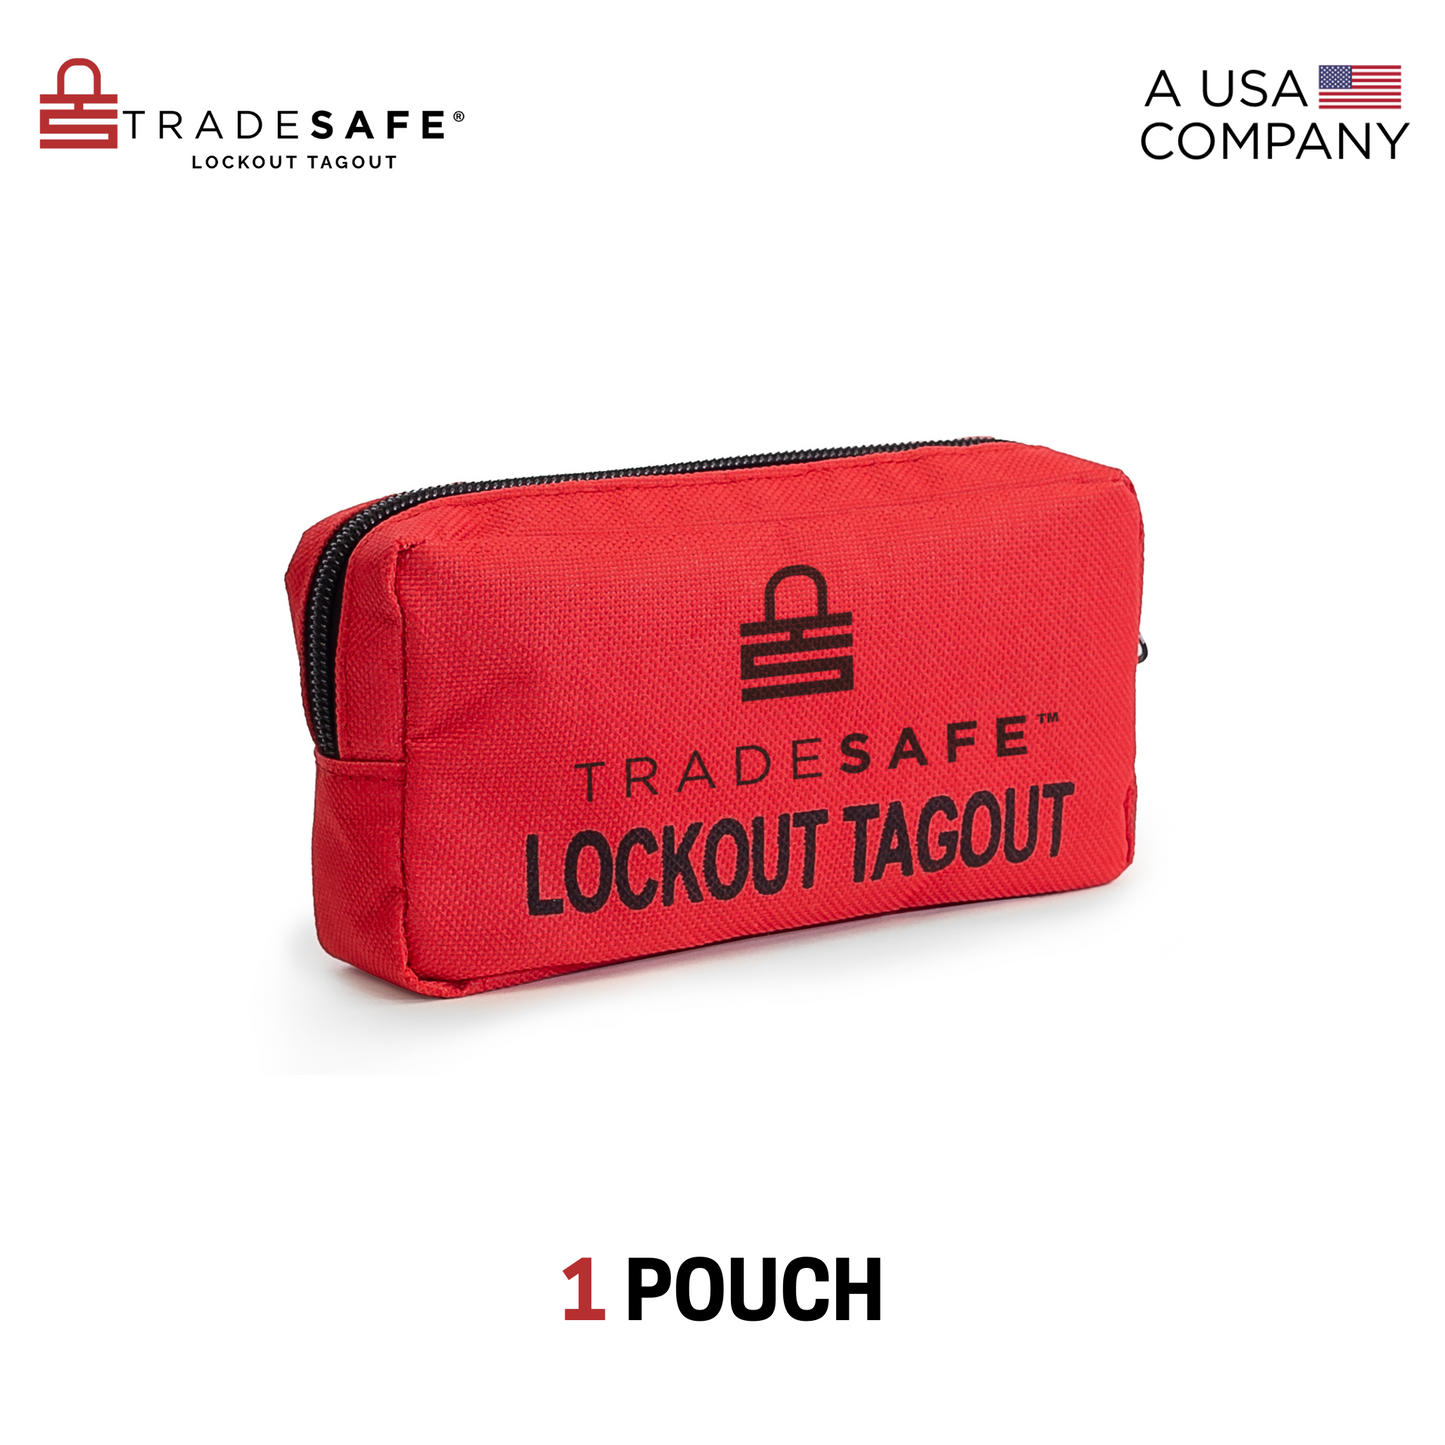 1 red tradesafe lockout tagout pouch